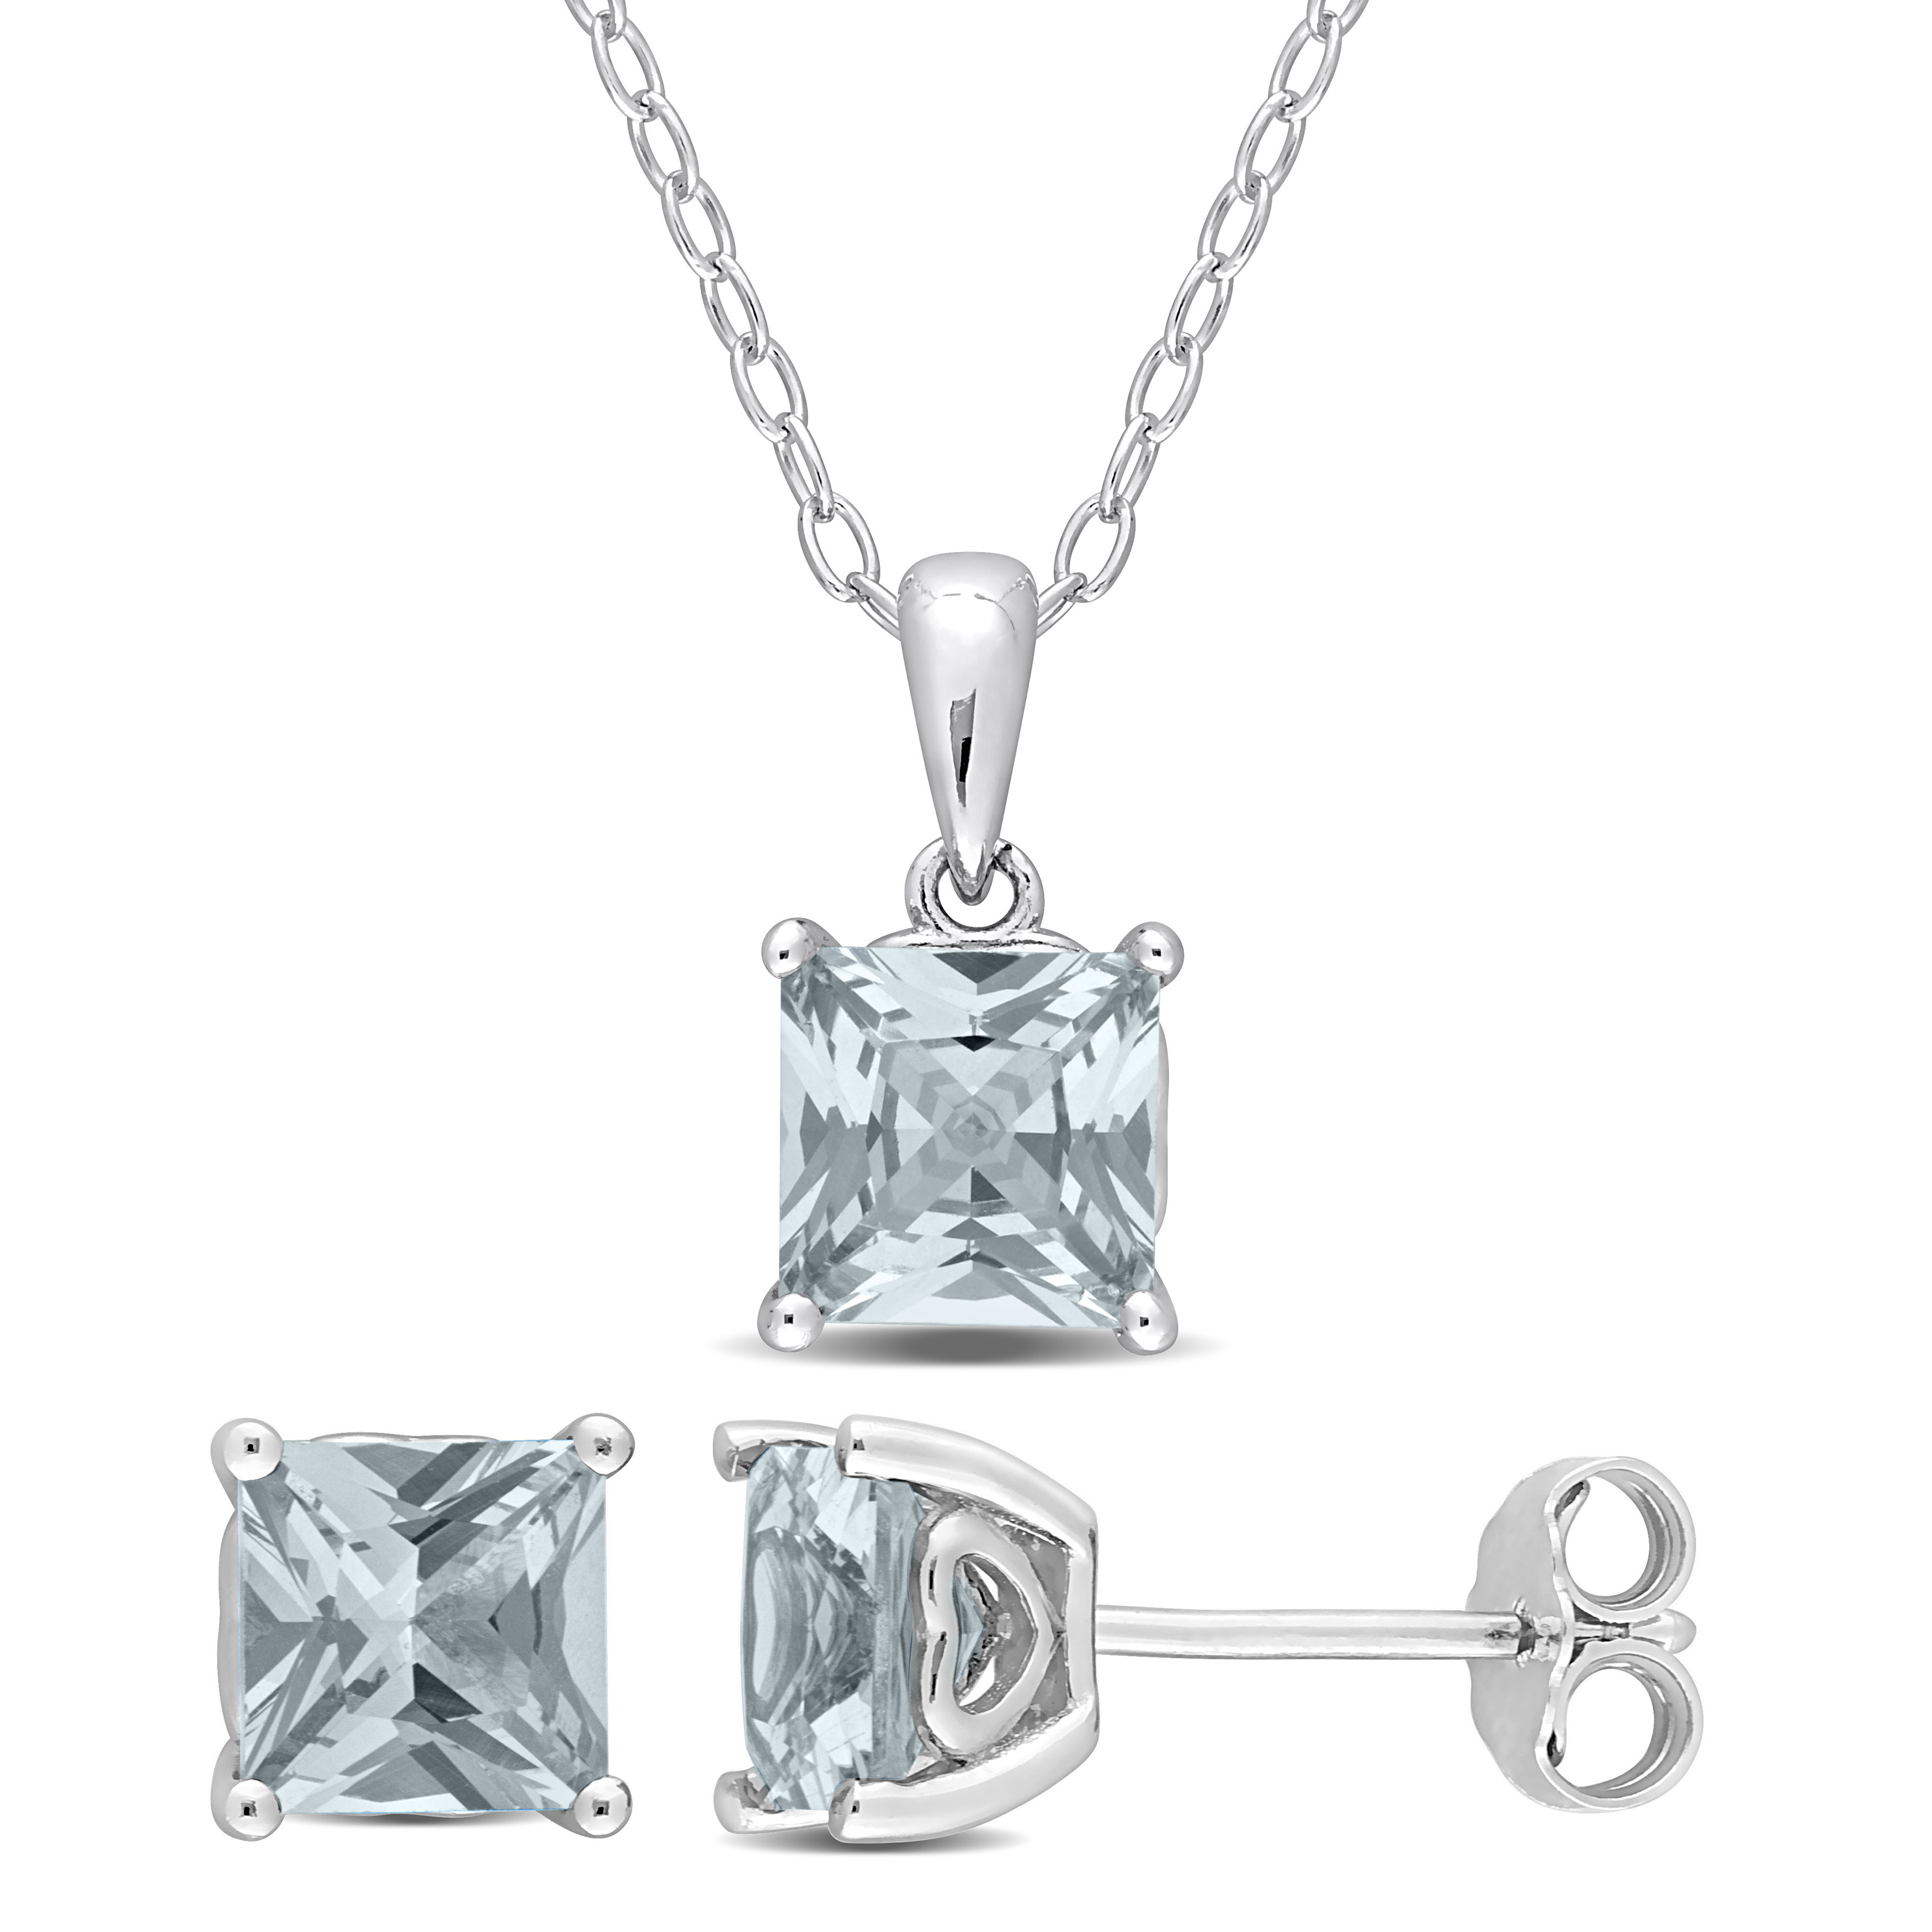 3 CT TGW Square Created Spinel (Aquamarine) 2-Piece Set of Pendant with Chain and Earrings in Sterling Silver